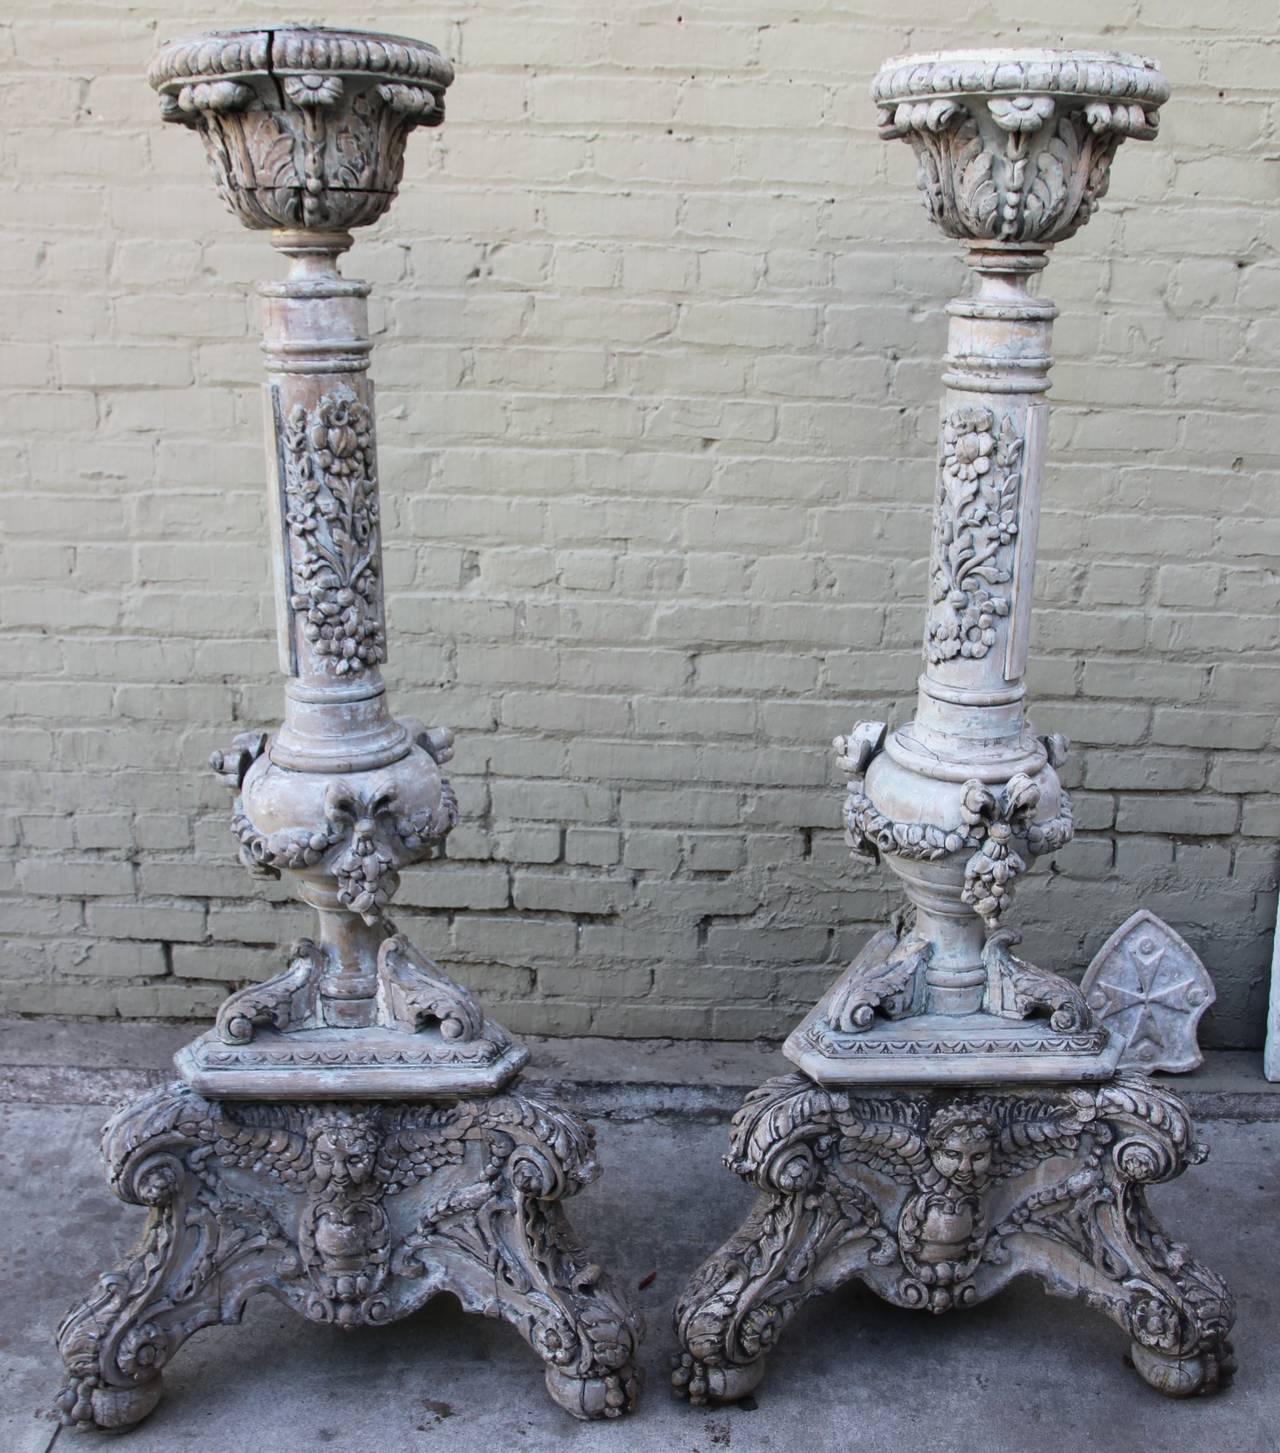 Pair of heavily carved Italian painted torchieres depicting cherubs, acanthus leaves and garlands of flowers throughout.